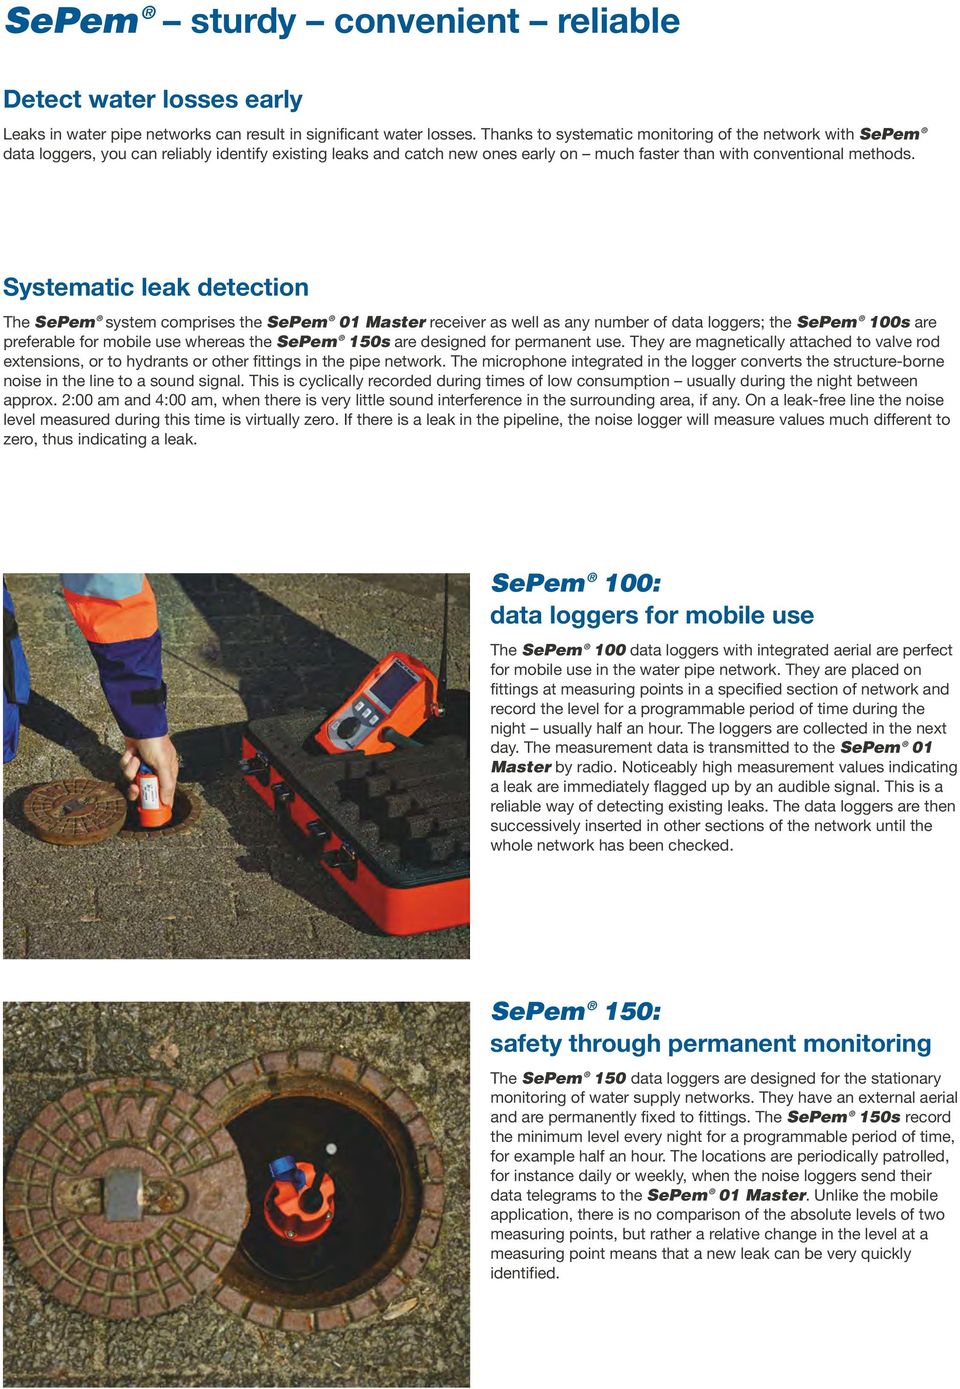 Systematic leak detection The SePem system comprises the SePem 01 Master receiver as well as any number of data loggers; the SePem 100s are preferable for mobile use whereas the SePem 150s are